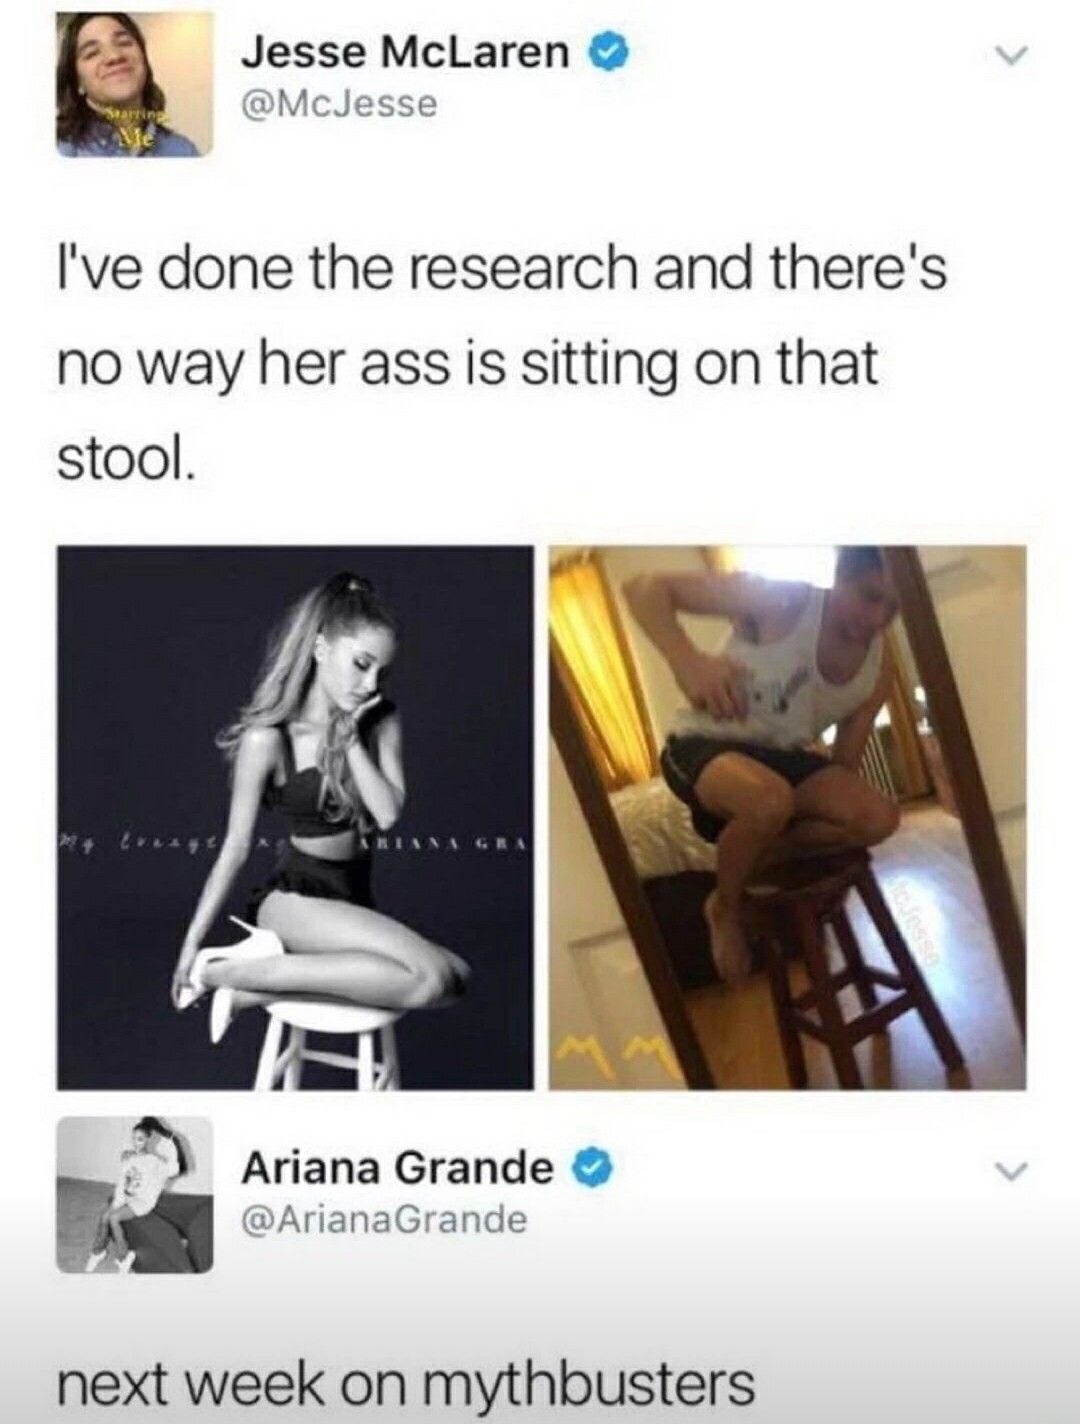 ariana grande stool meme - Jesse McLaren I've done the research and there's no way her ass is sitting on that stool. Ariana Grande Grande next week on mythbusters